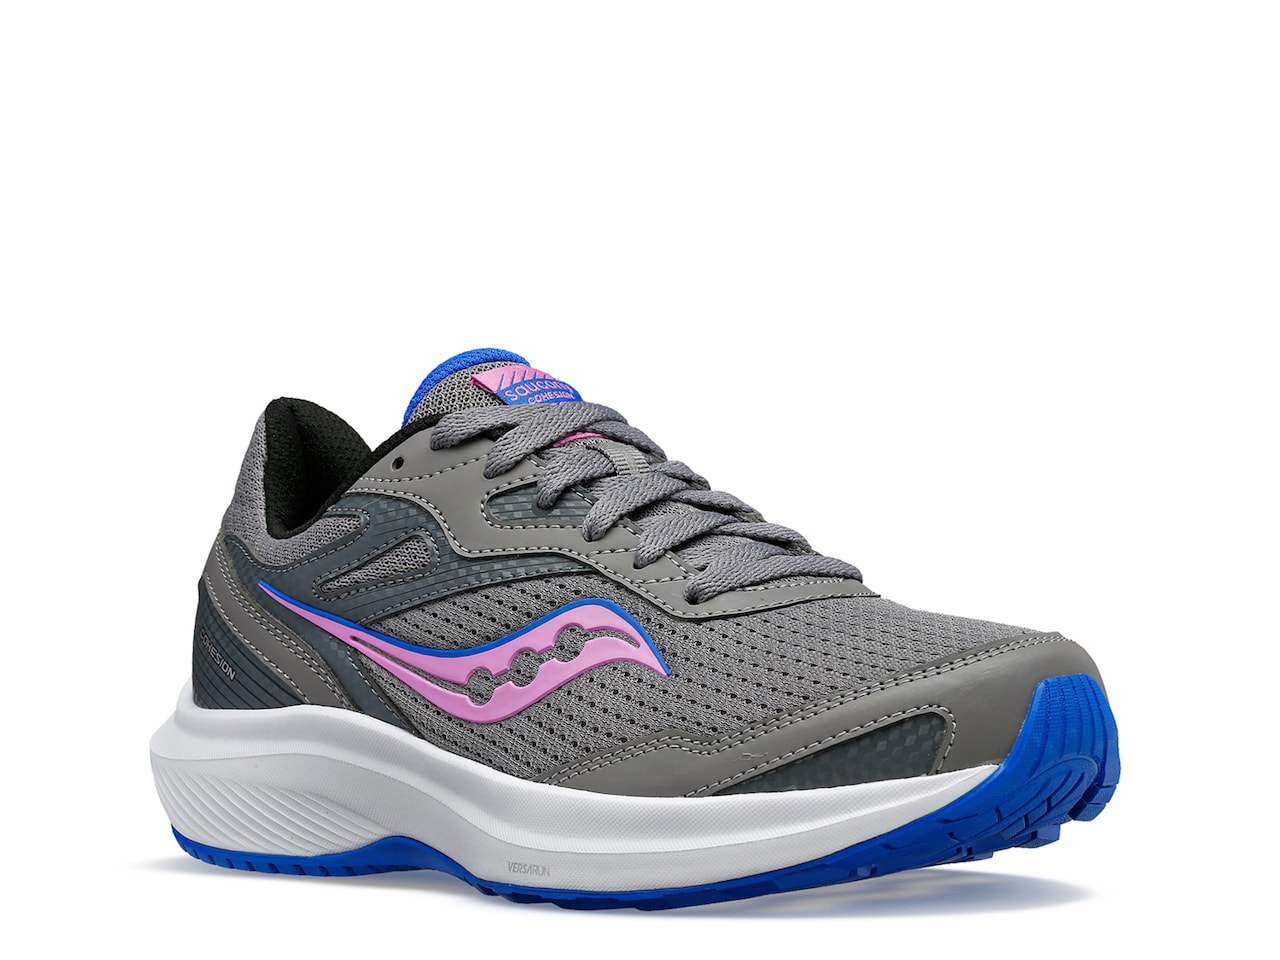 Saucony Women's Cohesion 16 Running Shoes (Grey/Purple) $38.49 + Free Shipping